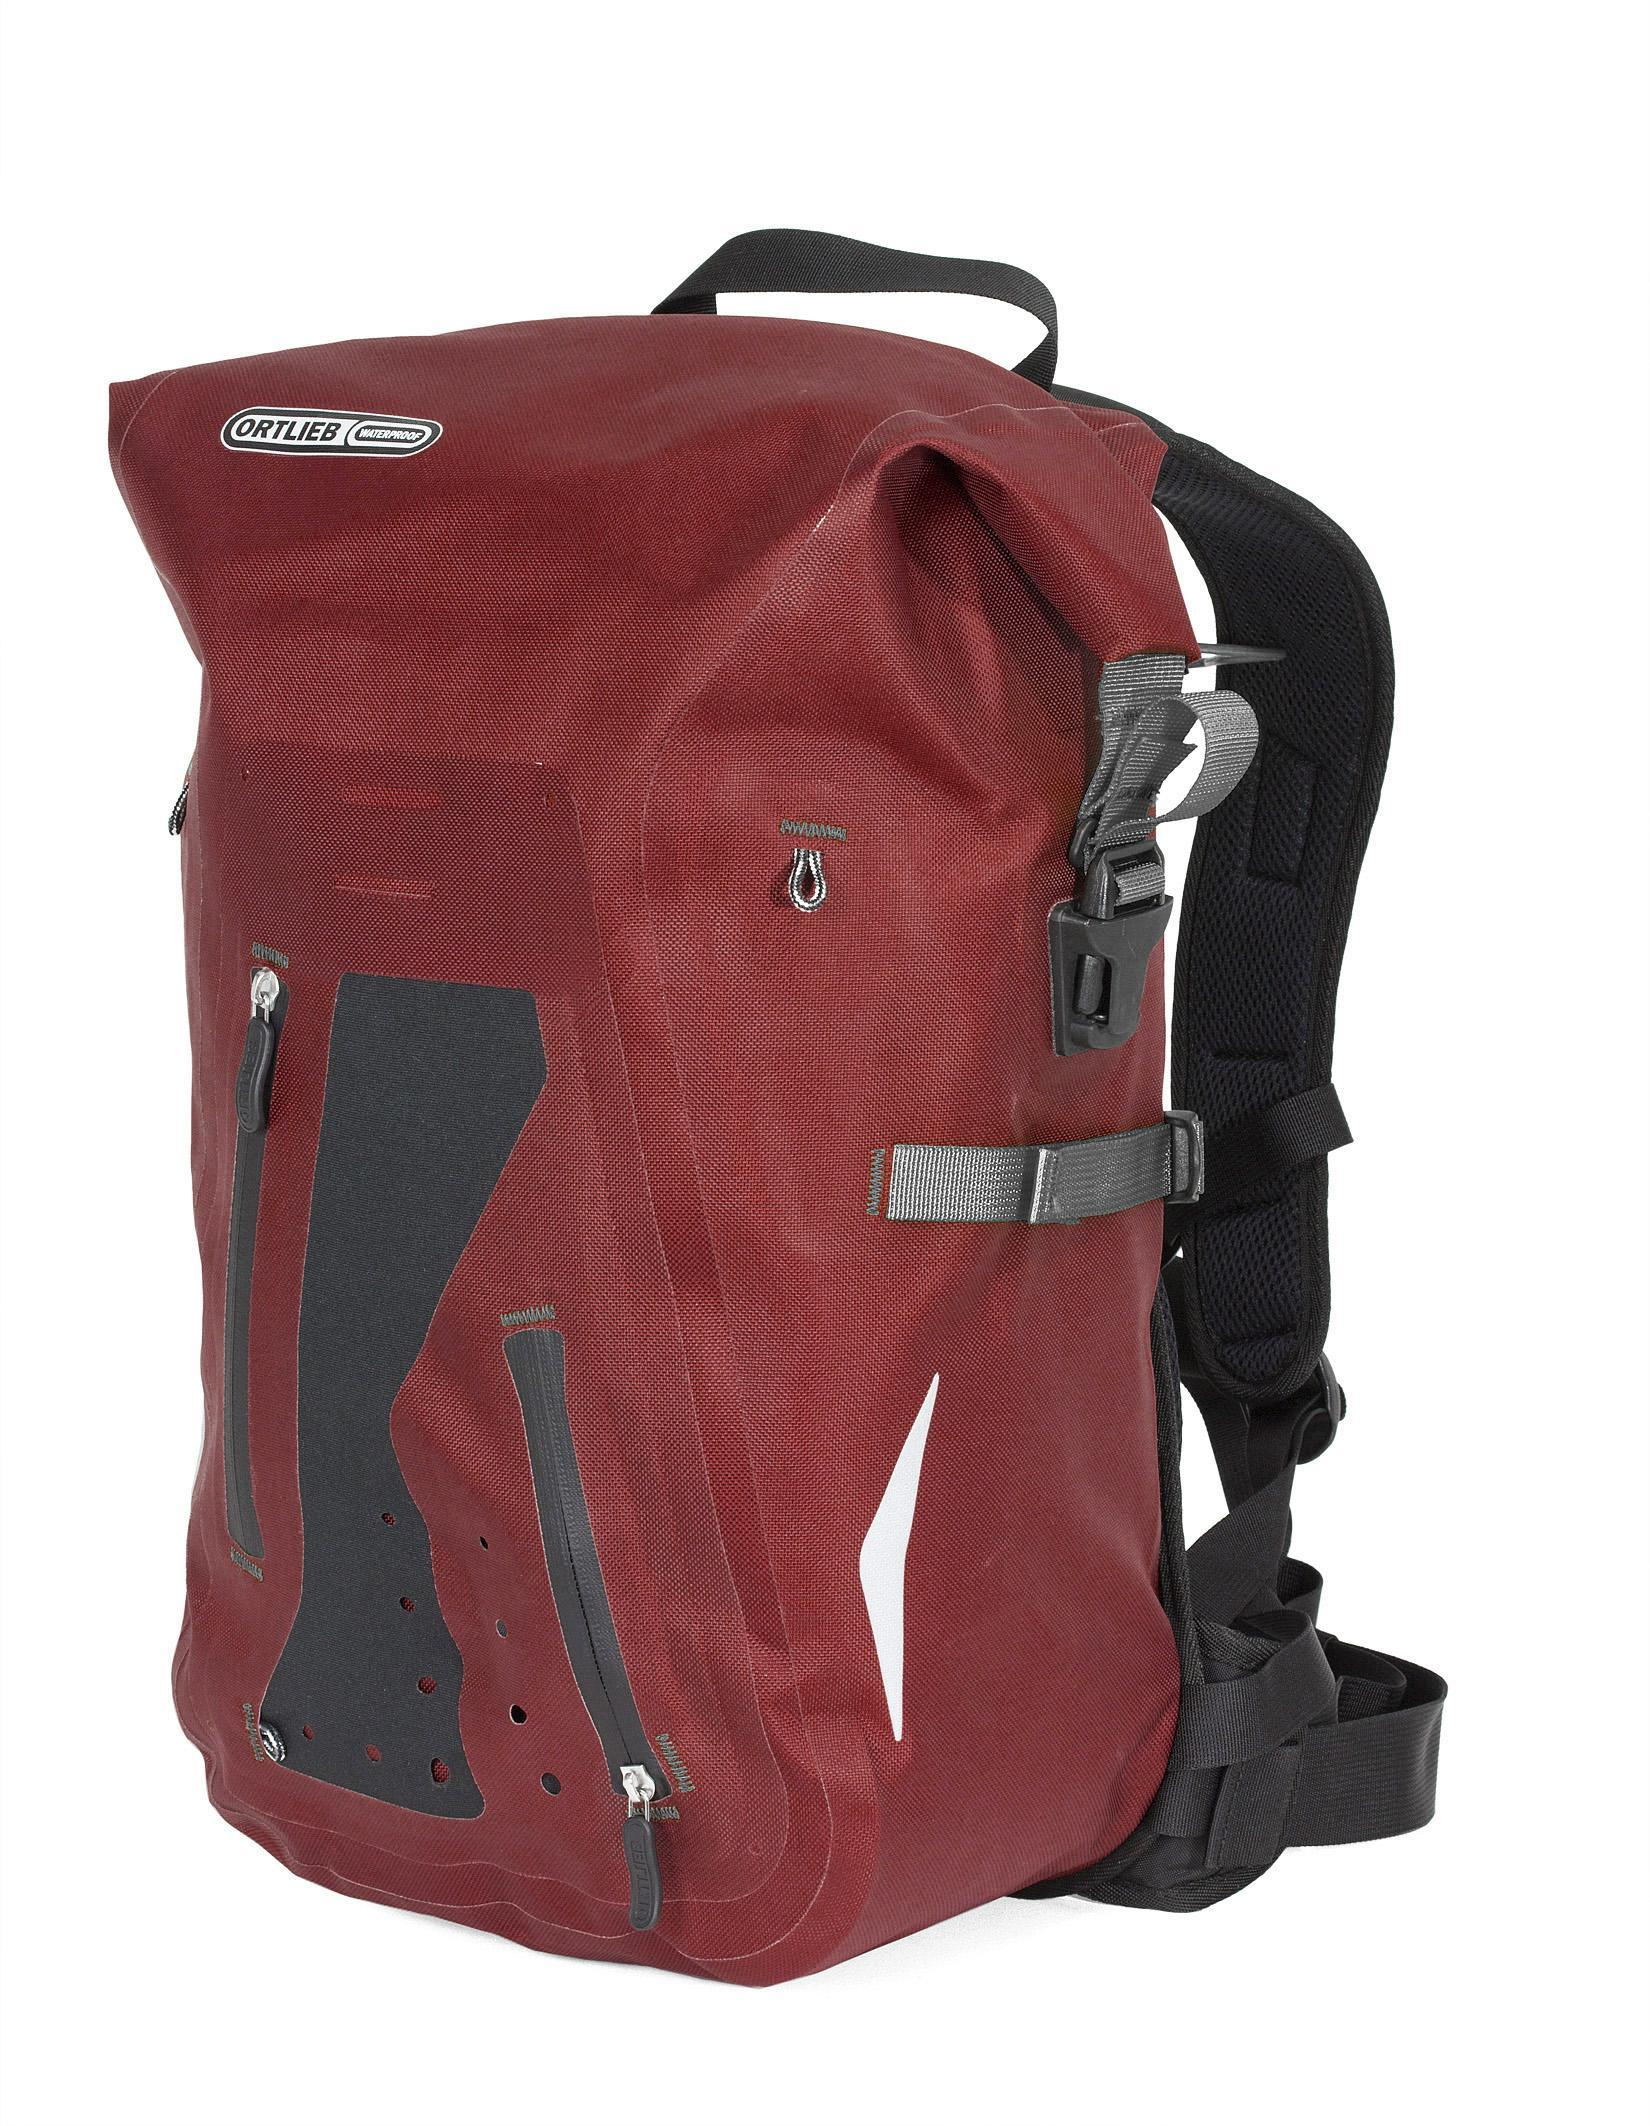 Ortlieb Packman Pro Two Rucksack